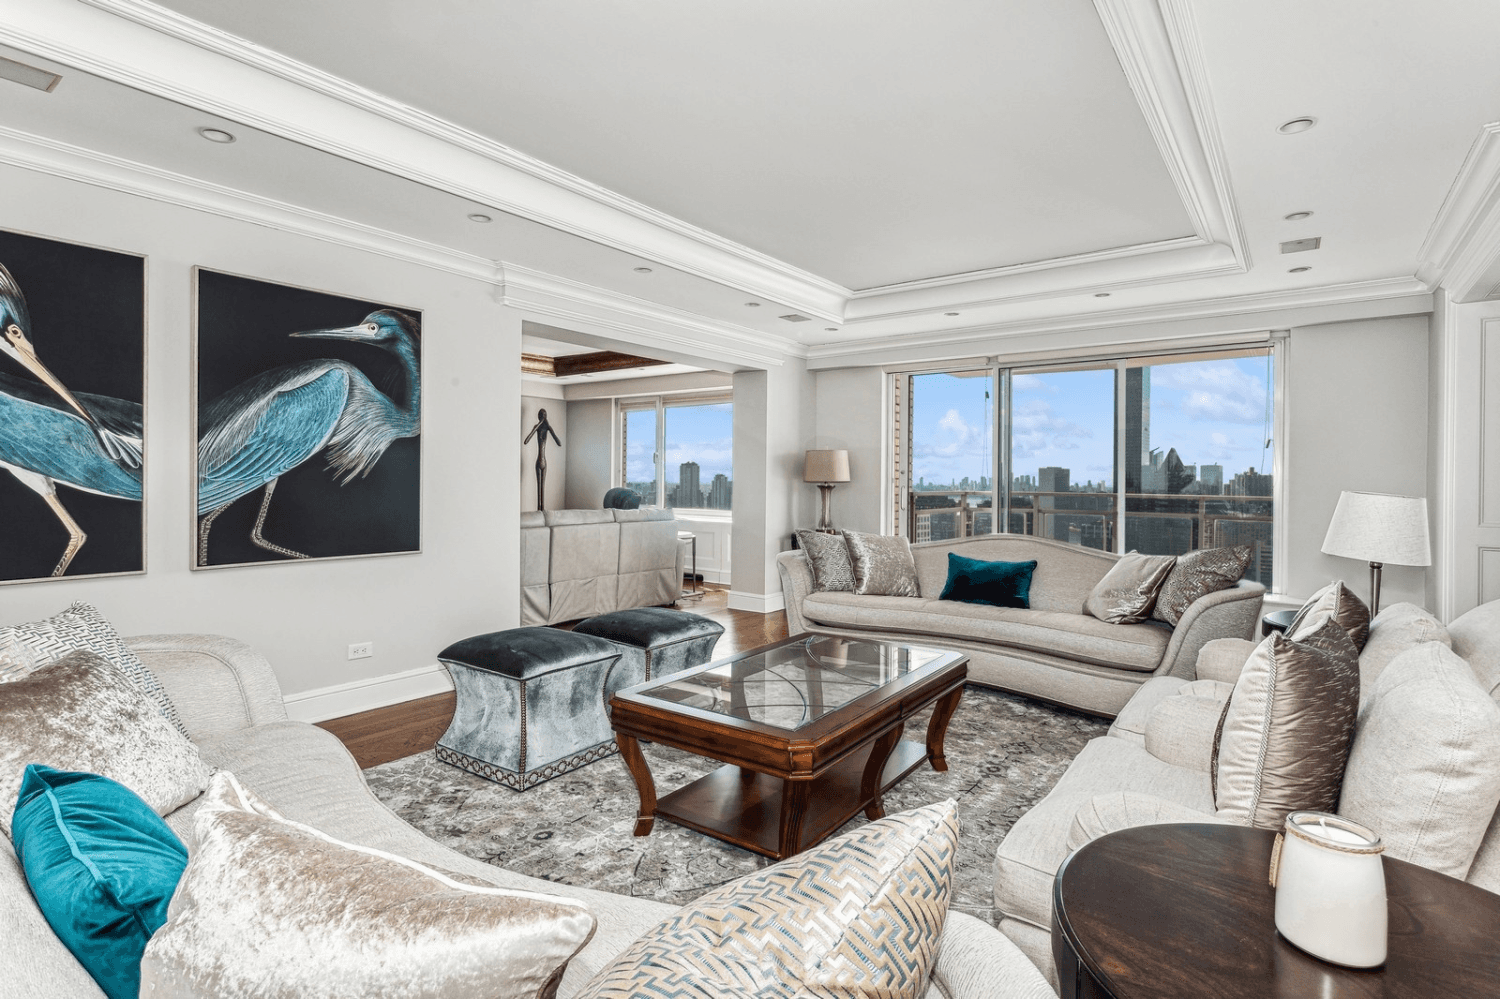 Perched on the 45th floor of the Excelsior, this property offers spectacular views of the iconic New York City skyline from every room and an over sized balcony to enjoy ...